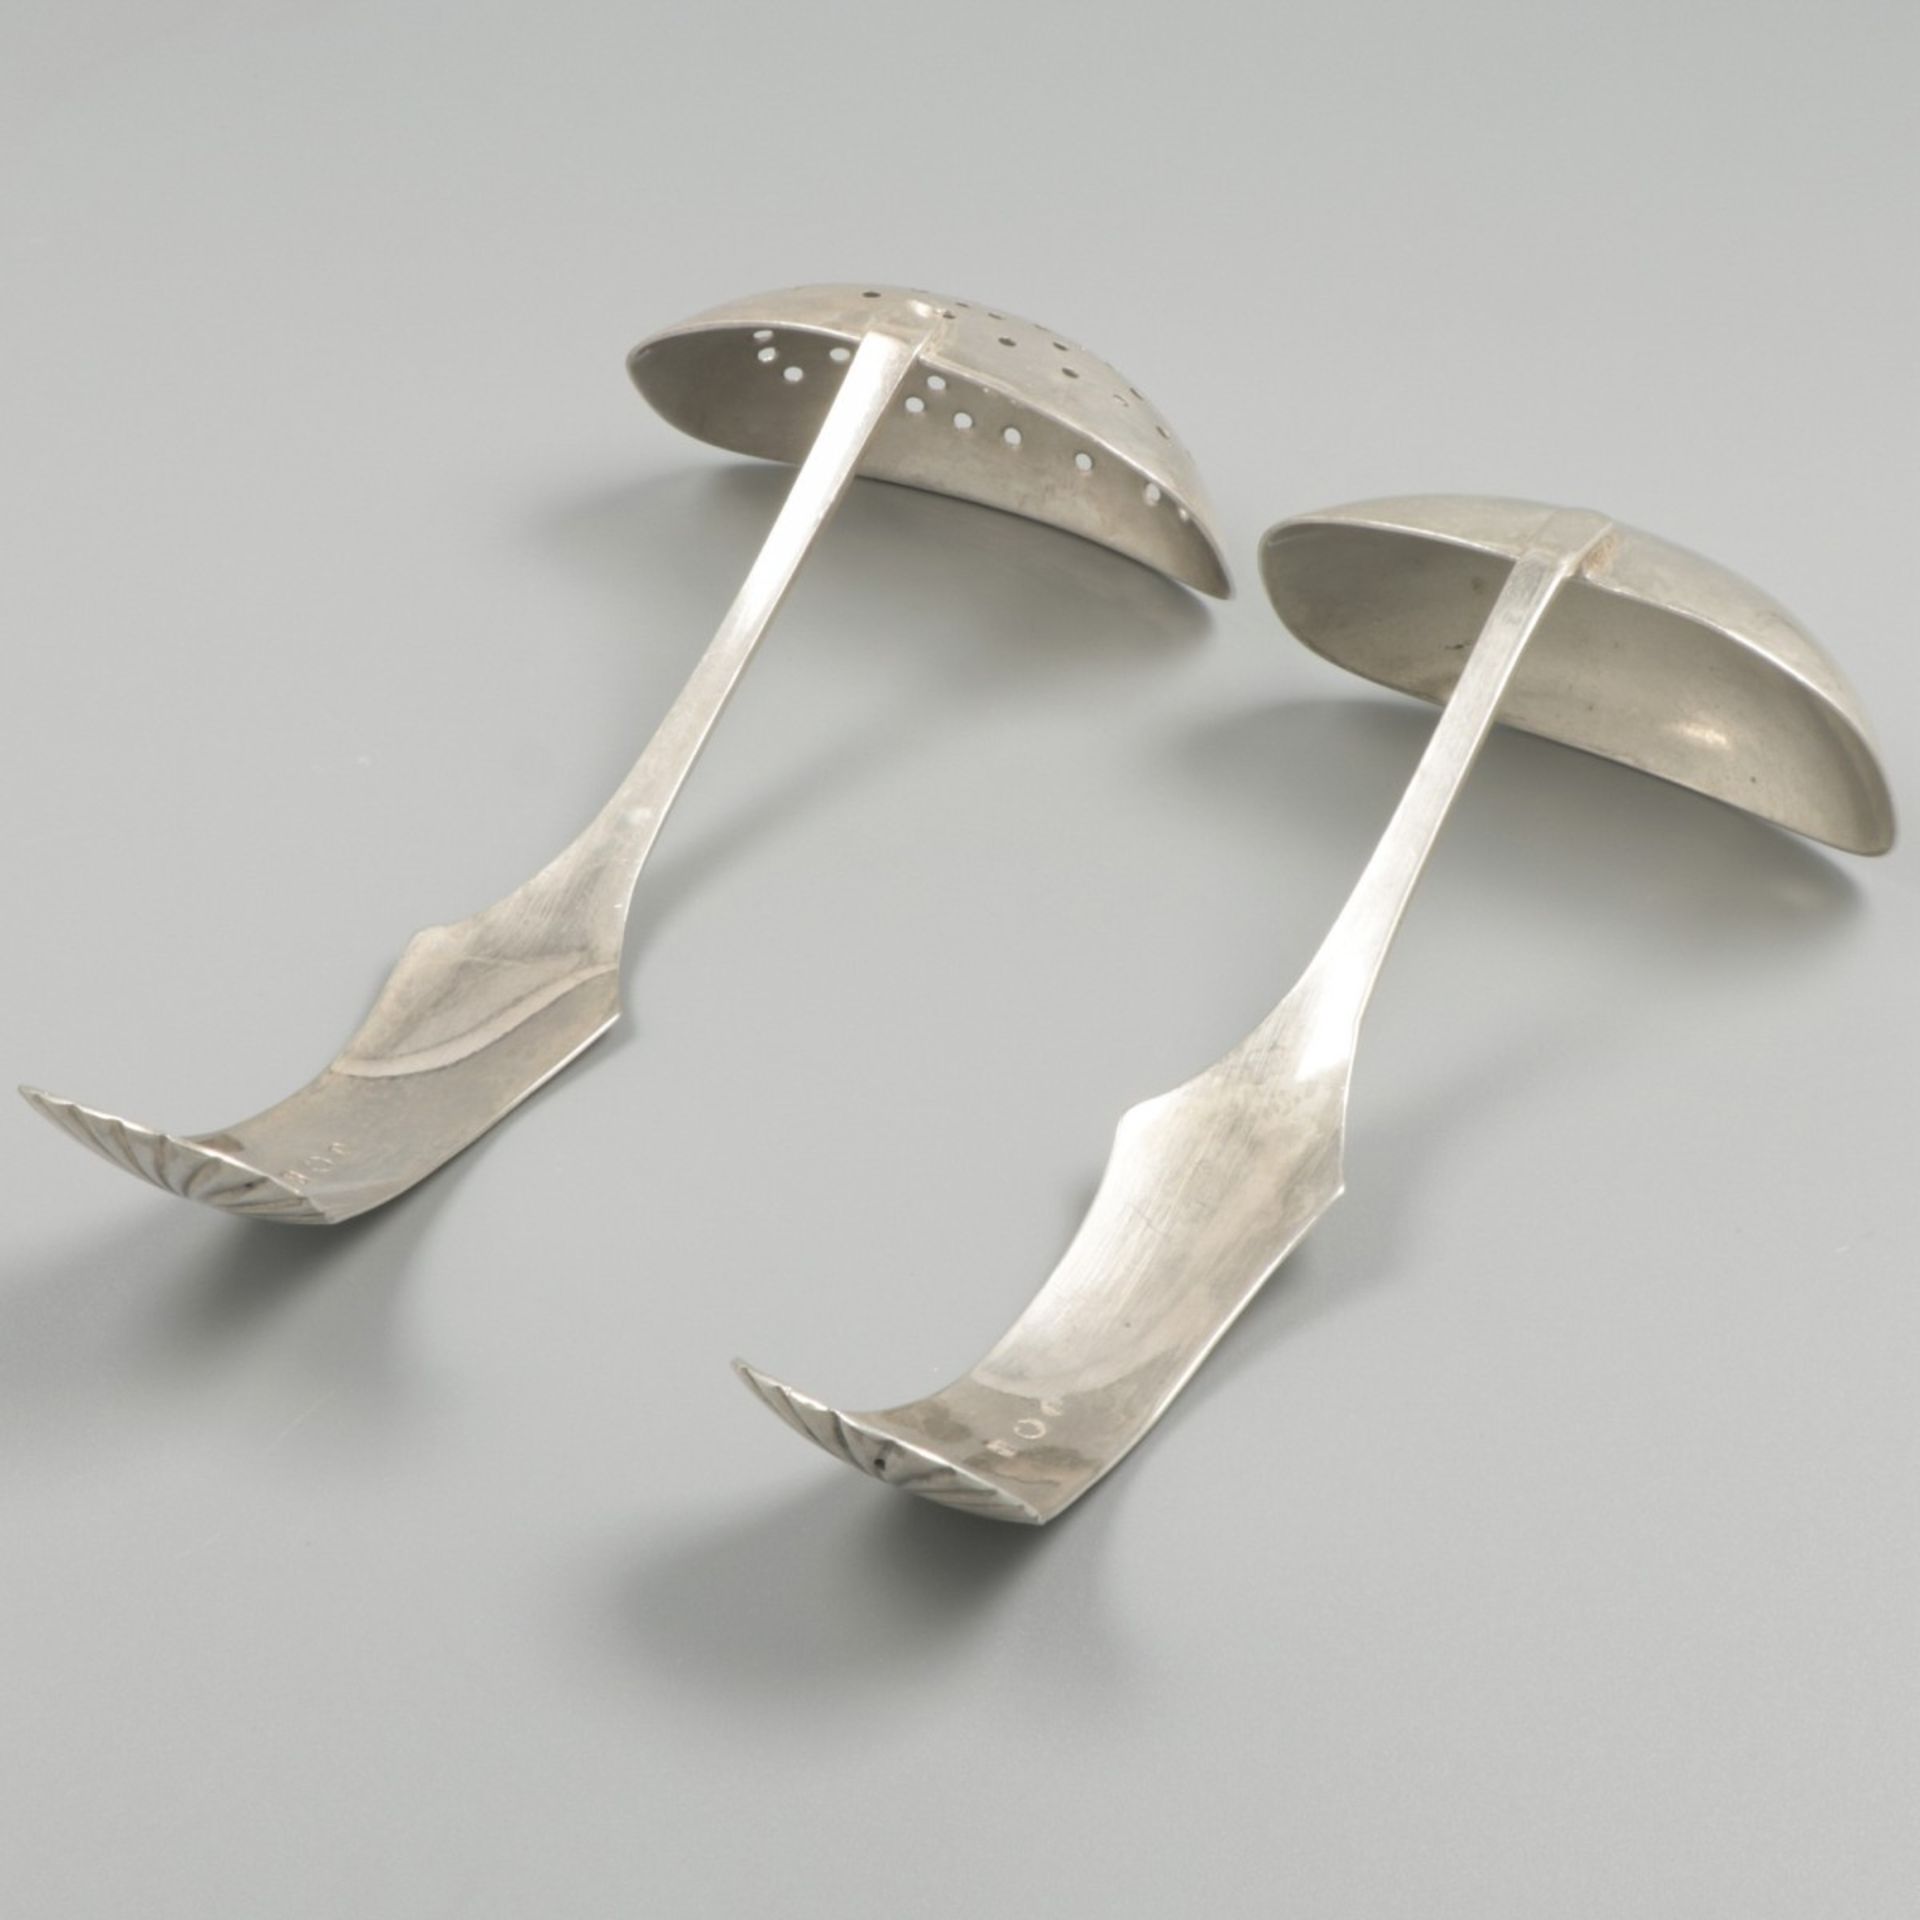 2-piece set of silver scoop-spoons. - Image 3 of 6